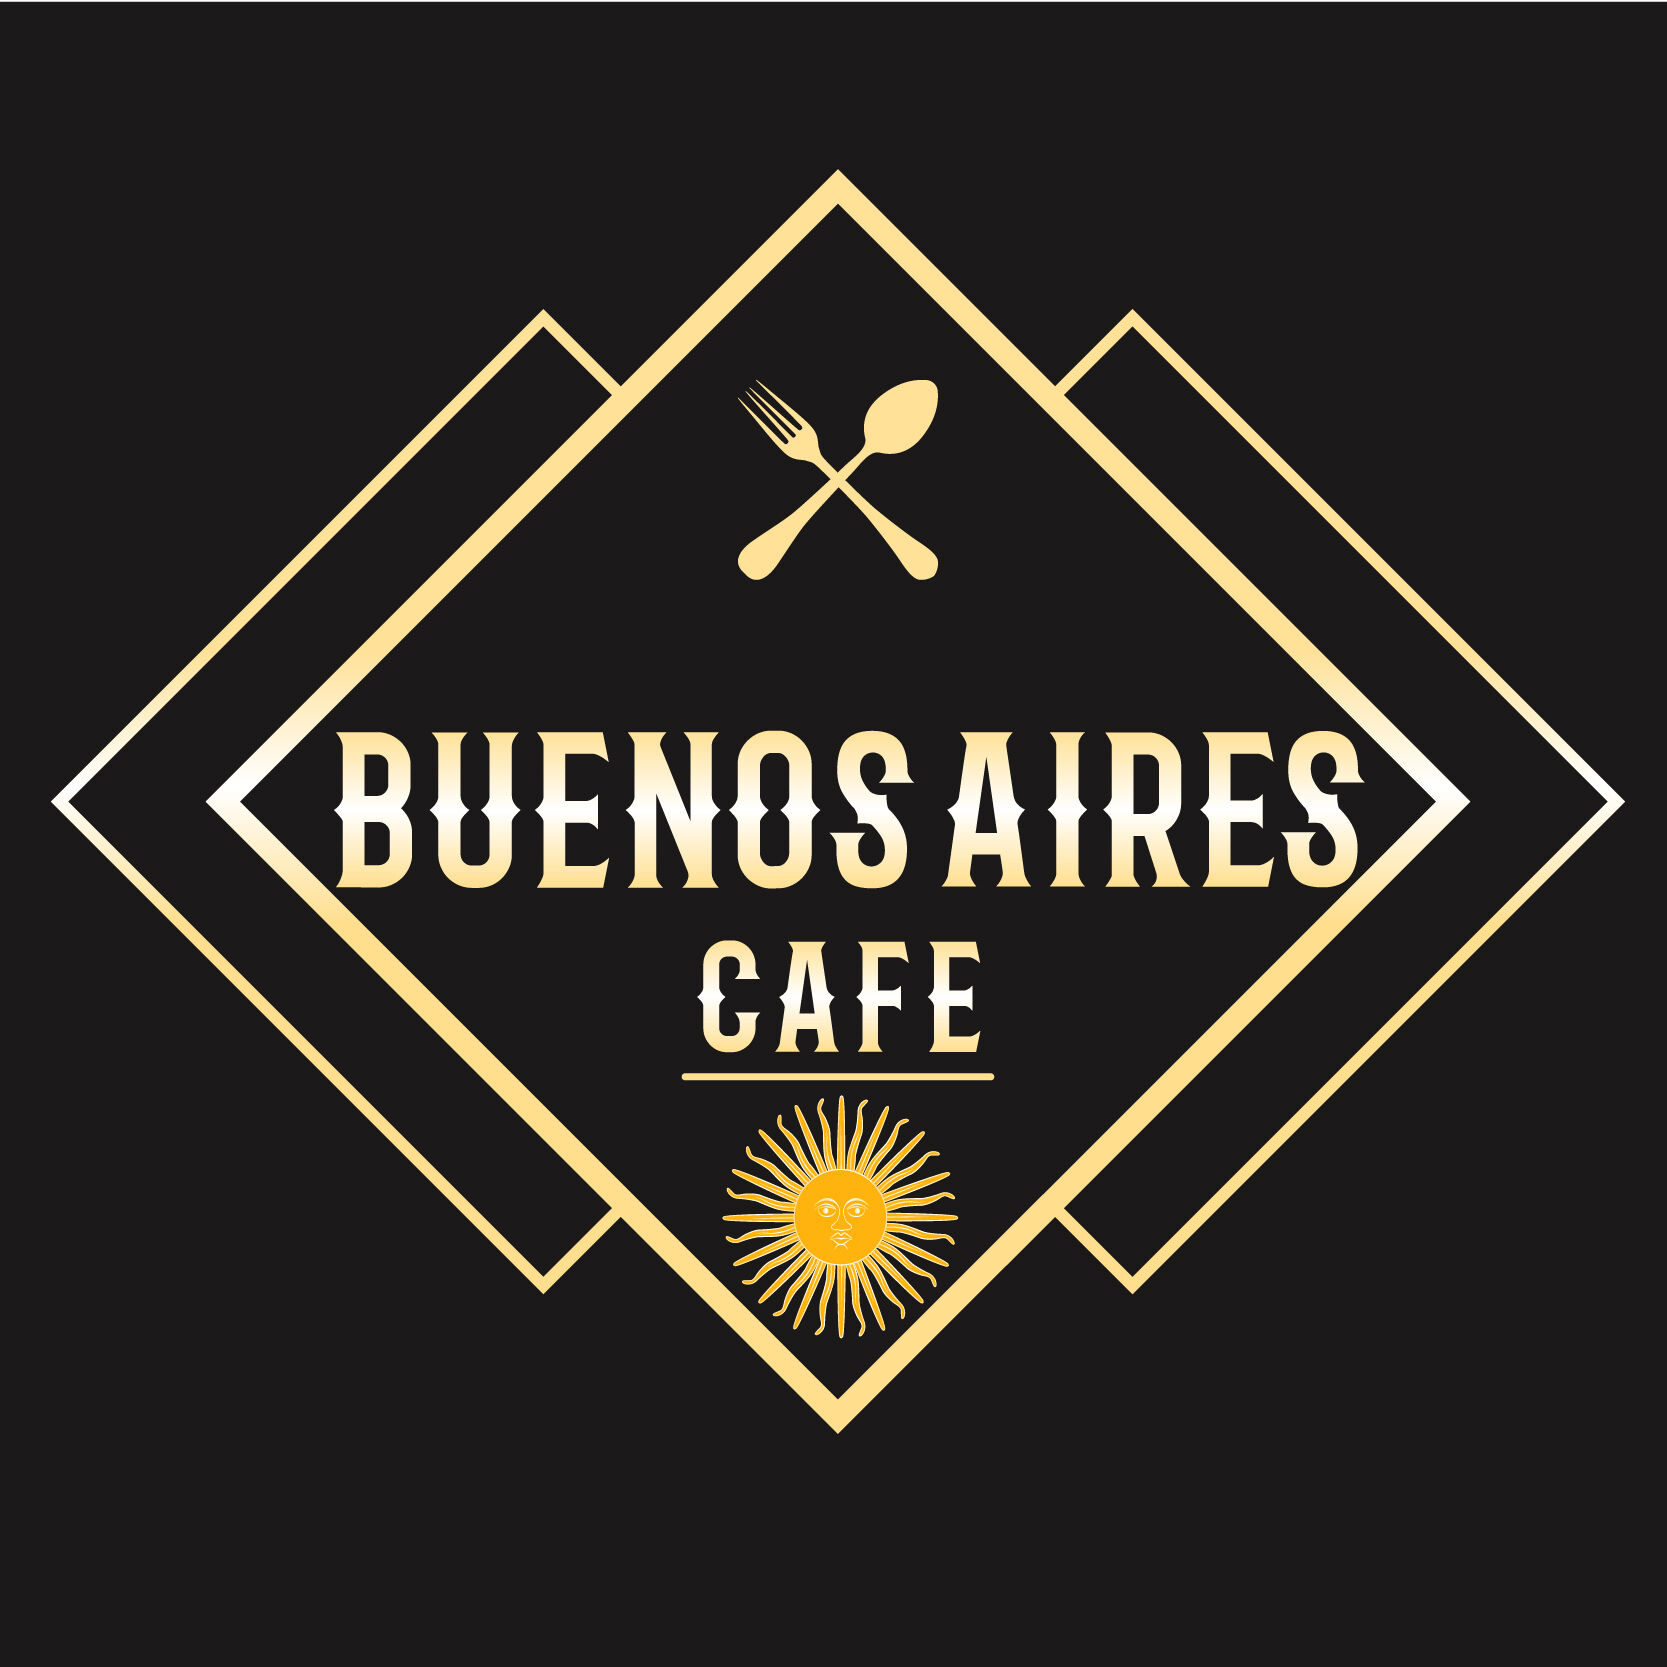 Buenos Aires Cafe to open on Tuesday, October 3